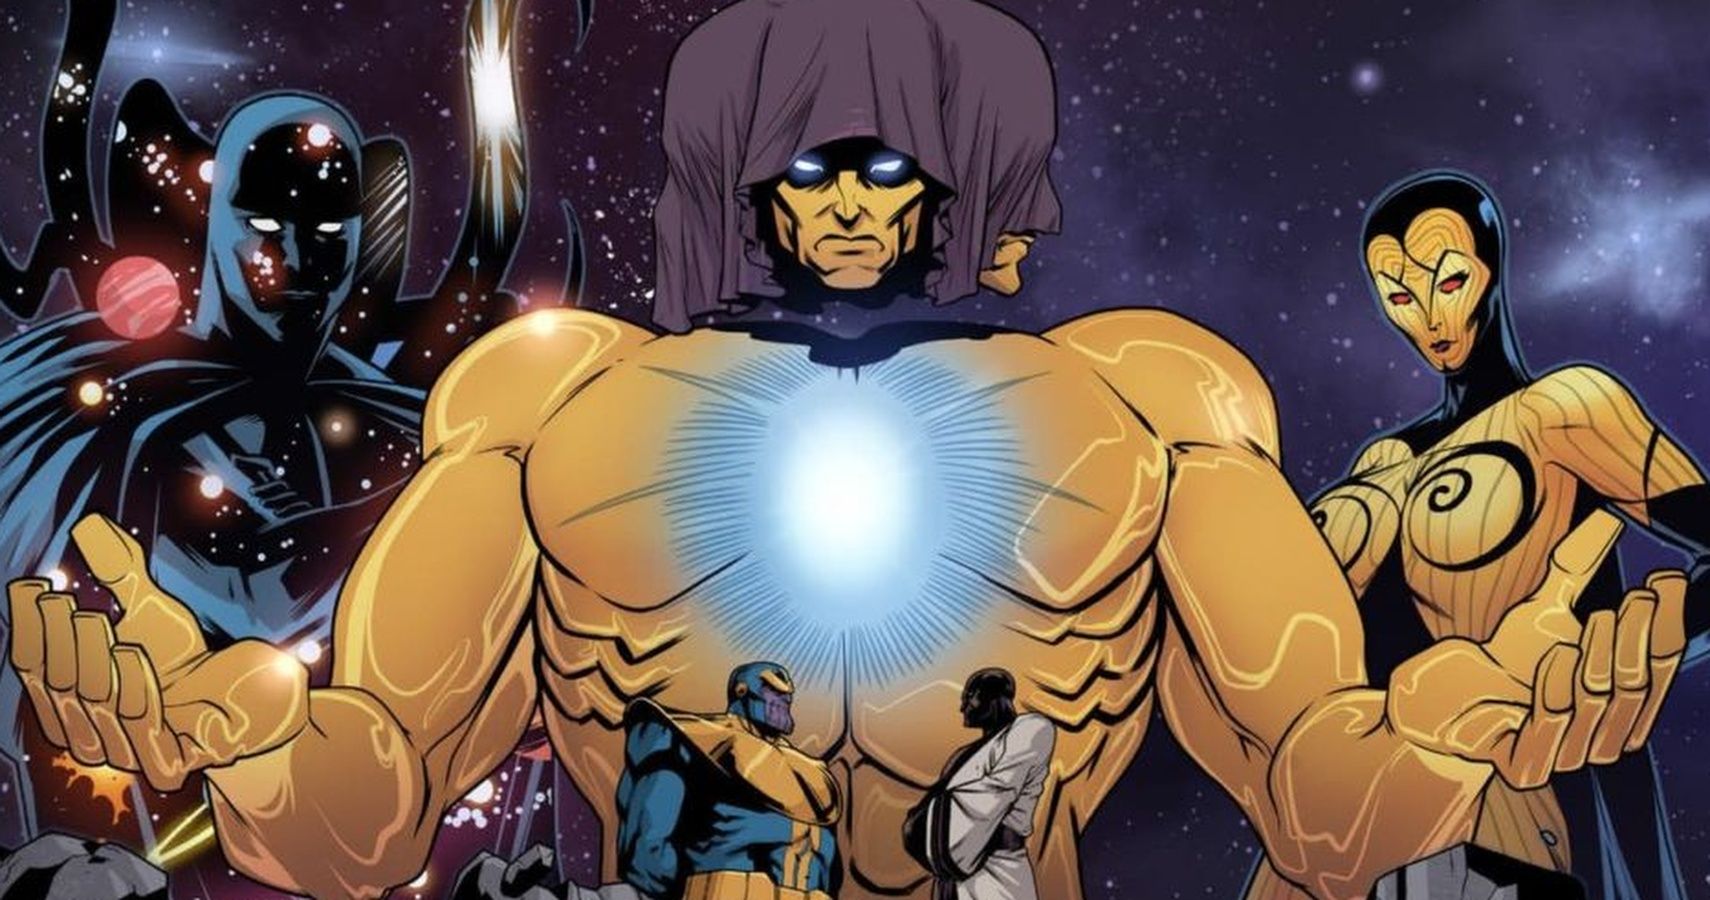 The Living Tribunal is almost supreme